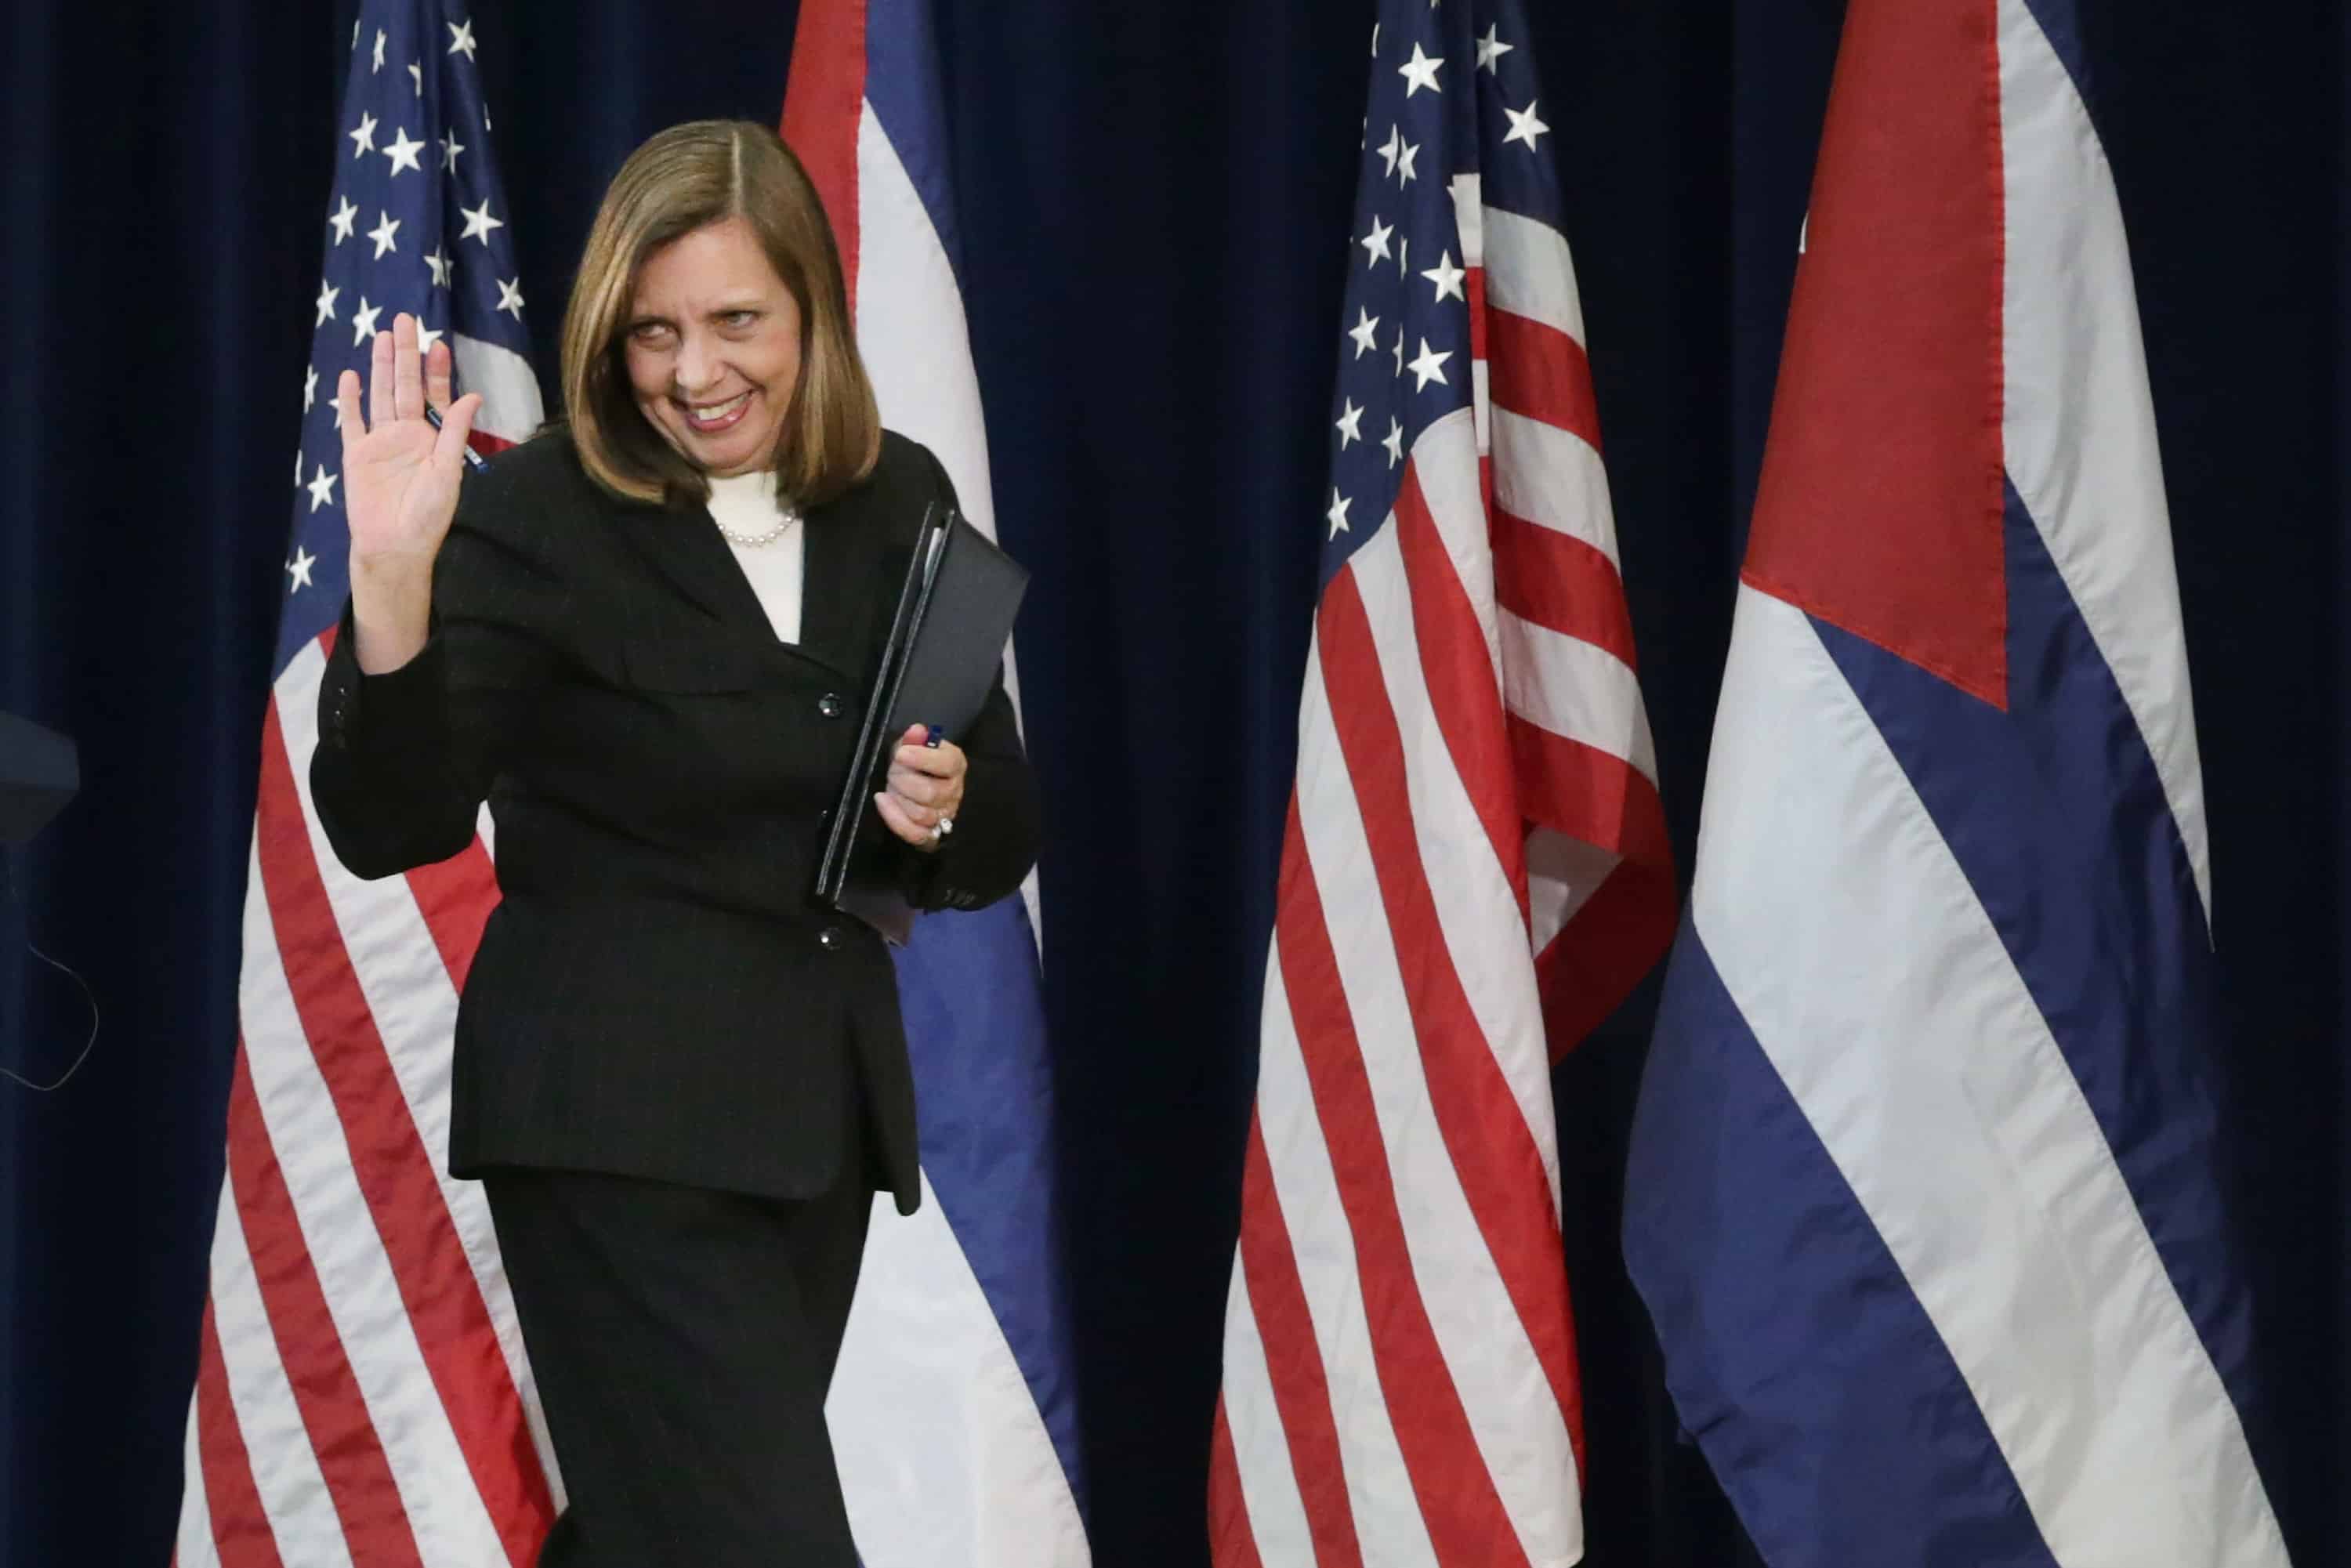 Cuban Foreign Ministry Director for North America Josefina Vidal .